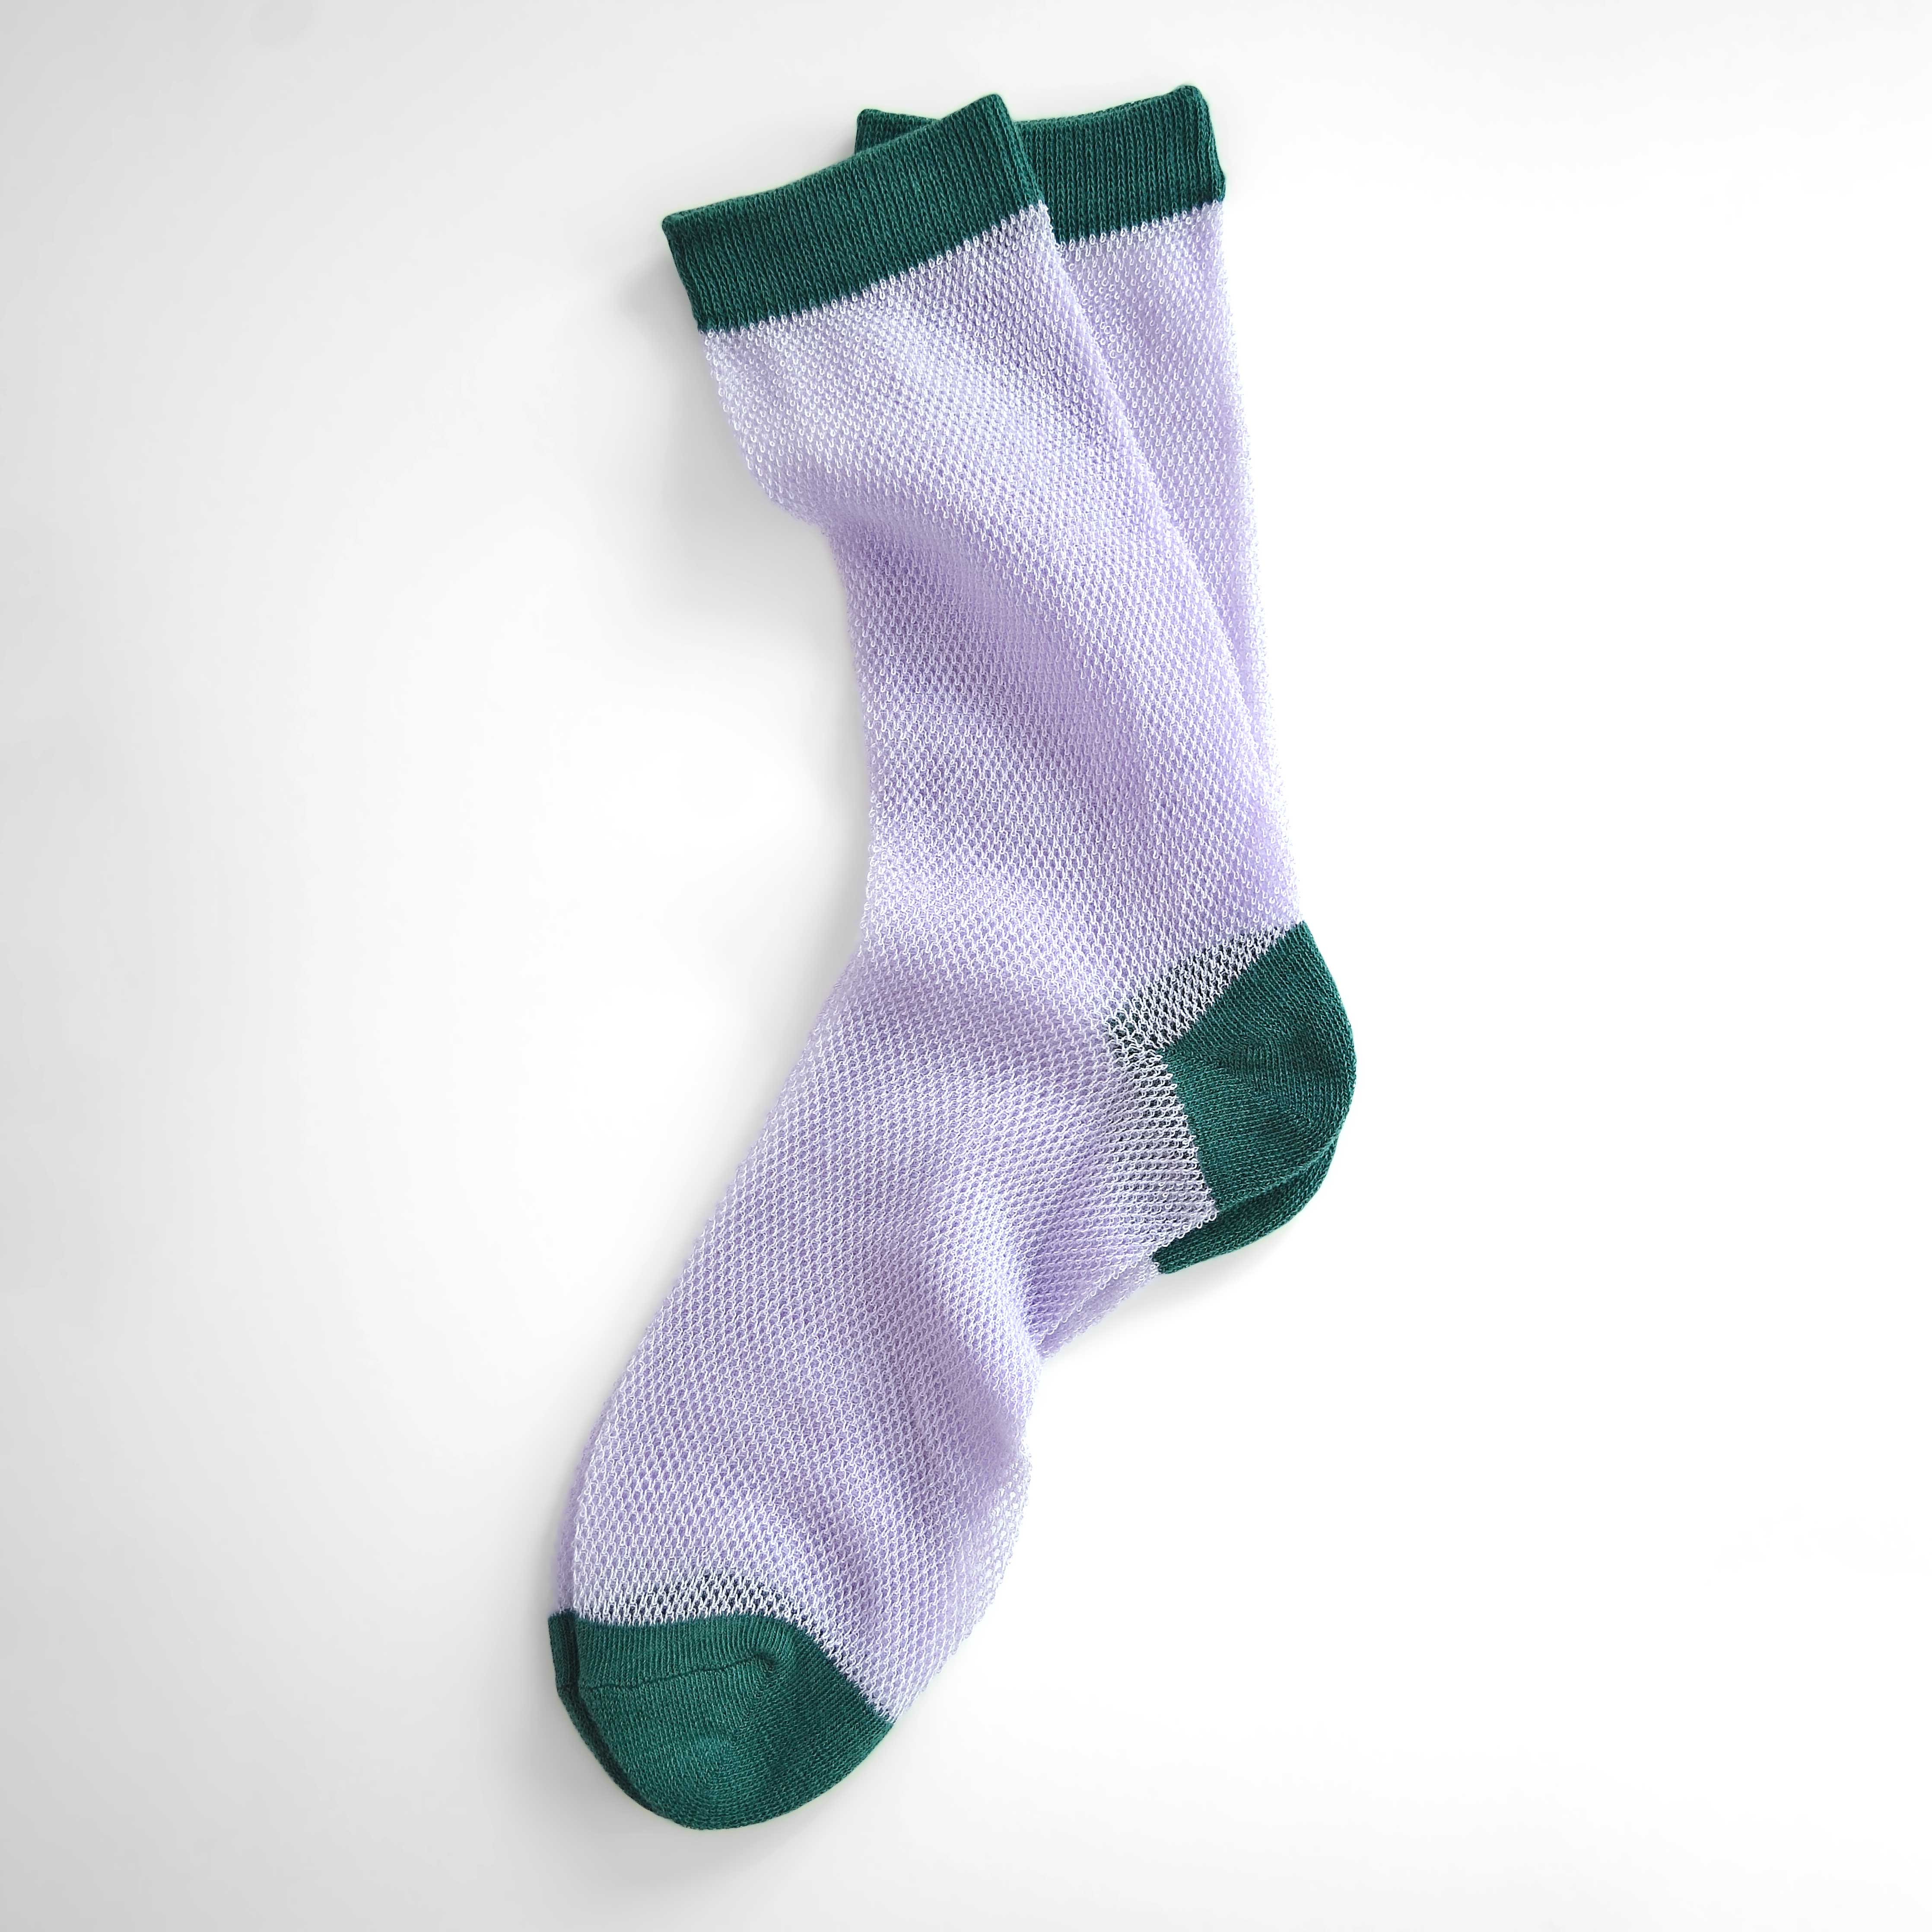 &#39;Valencia&#39; mid-crew socks, showcasing an open mesh sheer design in Cantaloupe, Pink, and Purple, effortlessly blending breathability and chic style. Size: Small (US women’s shoe size: 4-8)